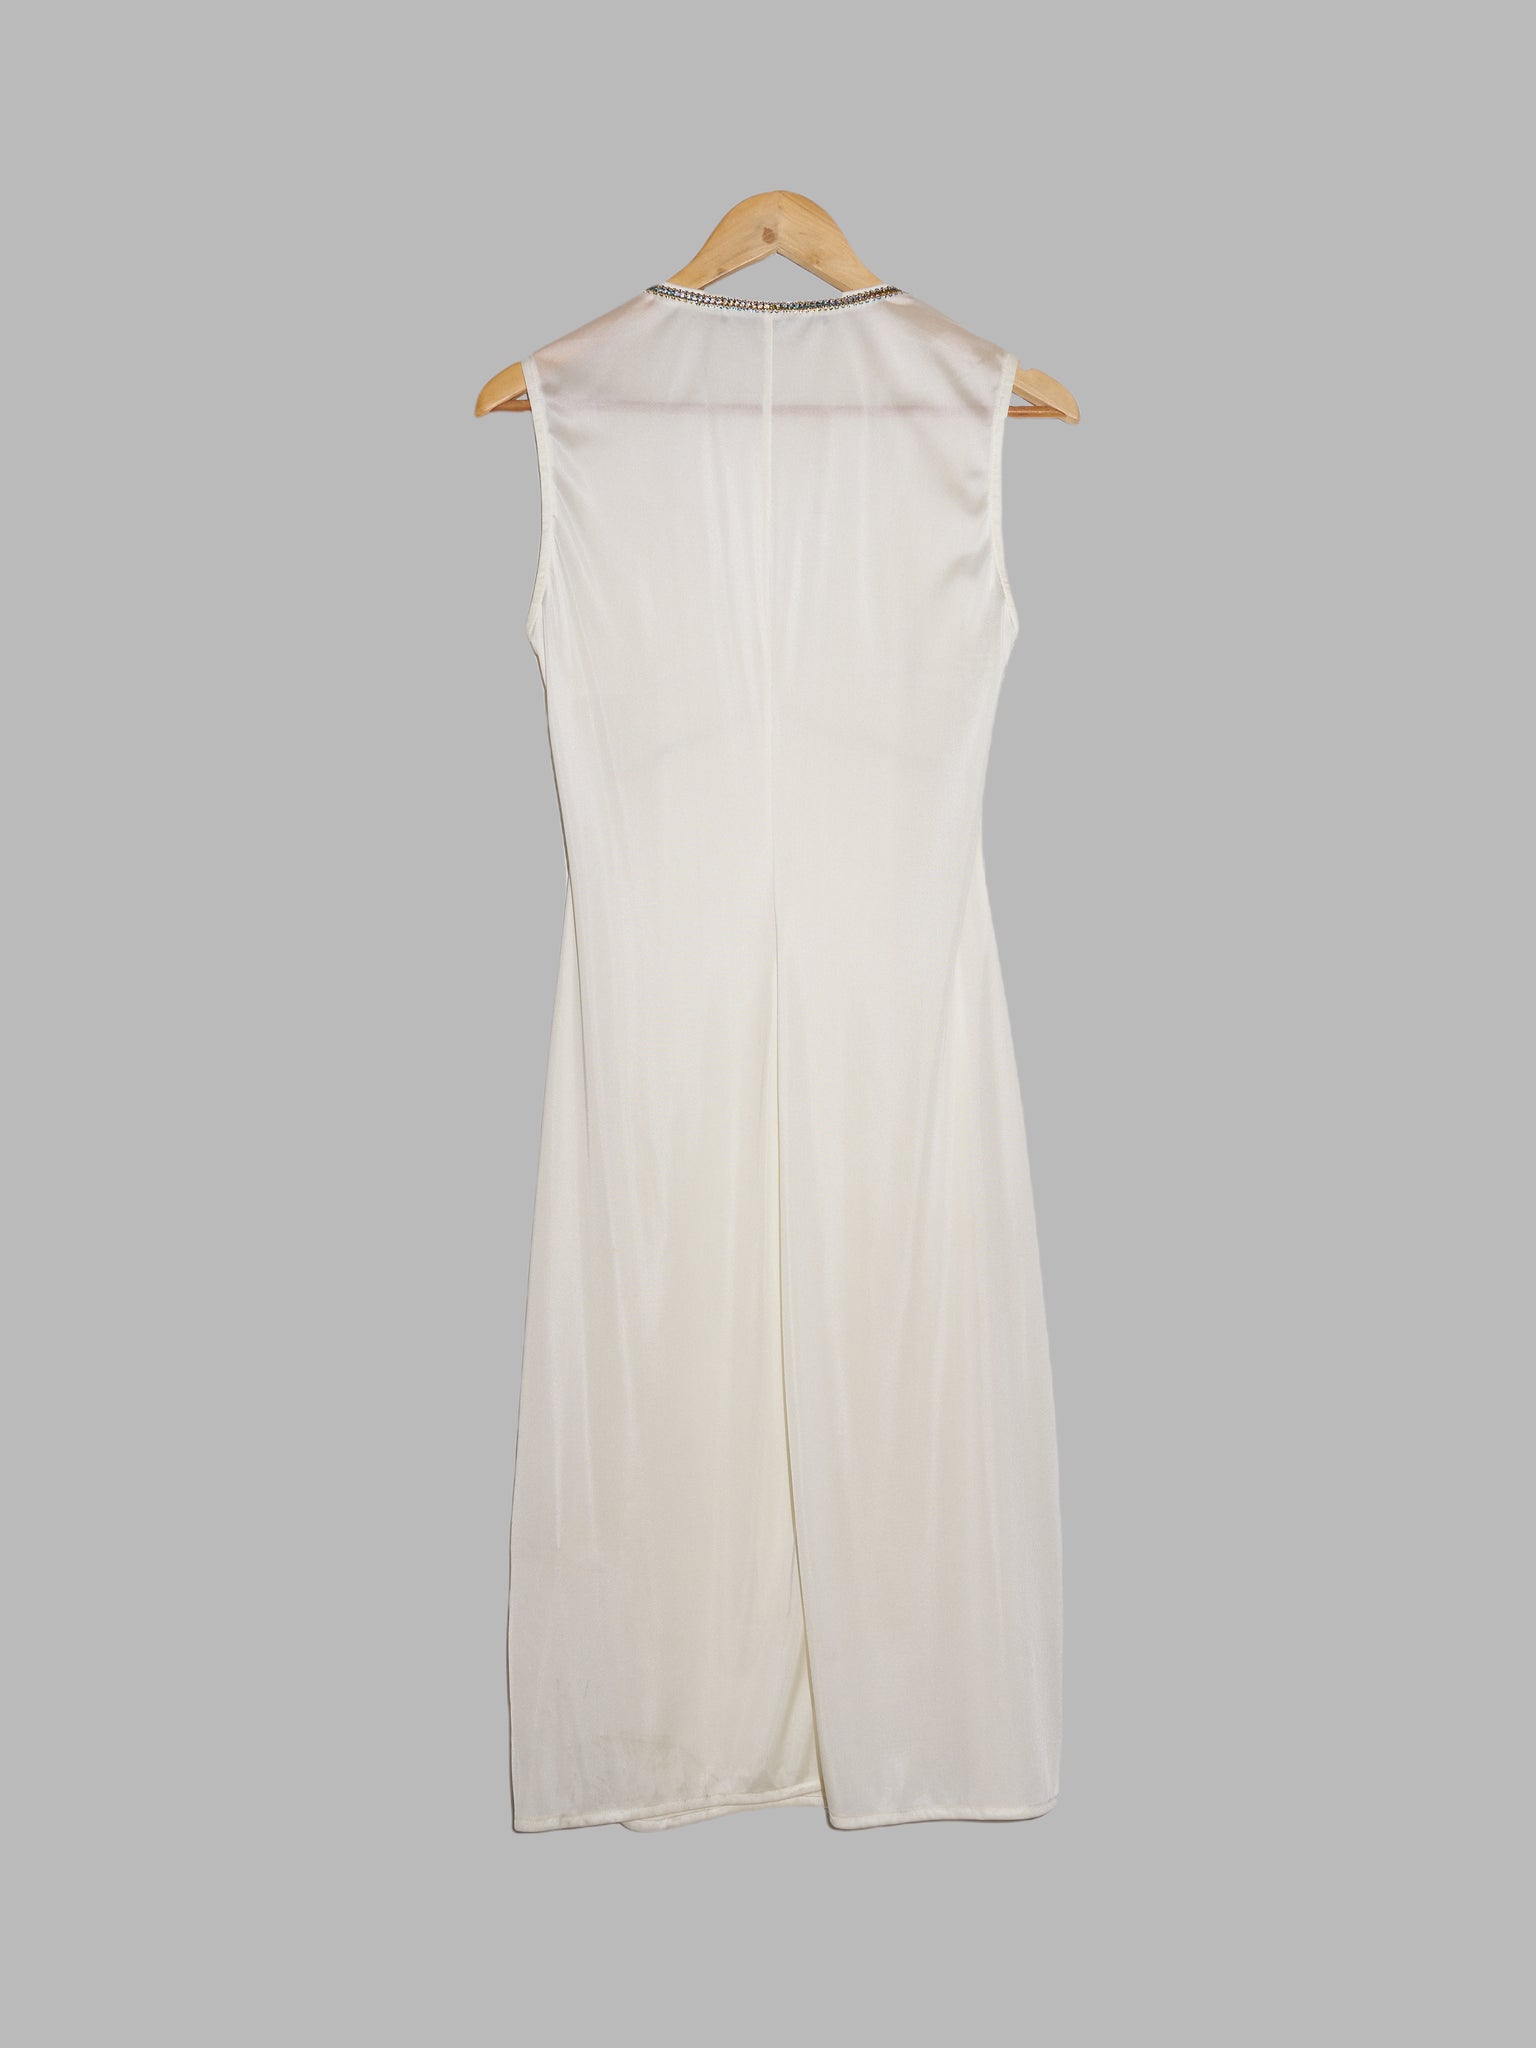 Jean Colonna off-white cream sleeveless dress with bejeweled applique - size 44